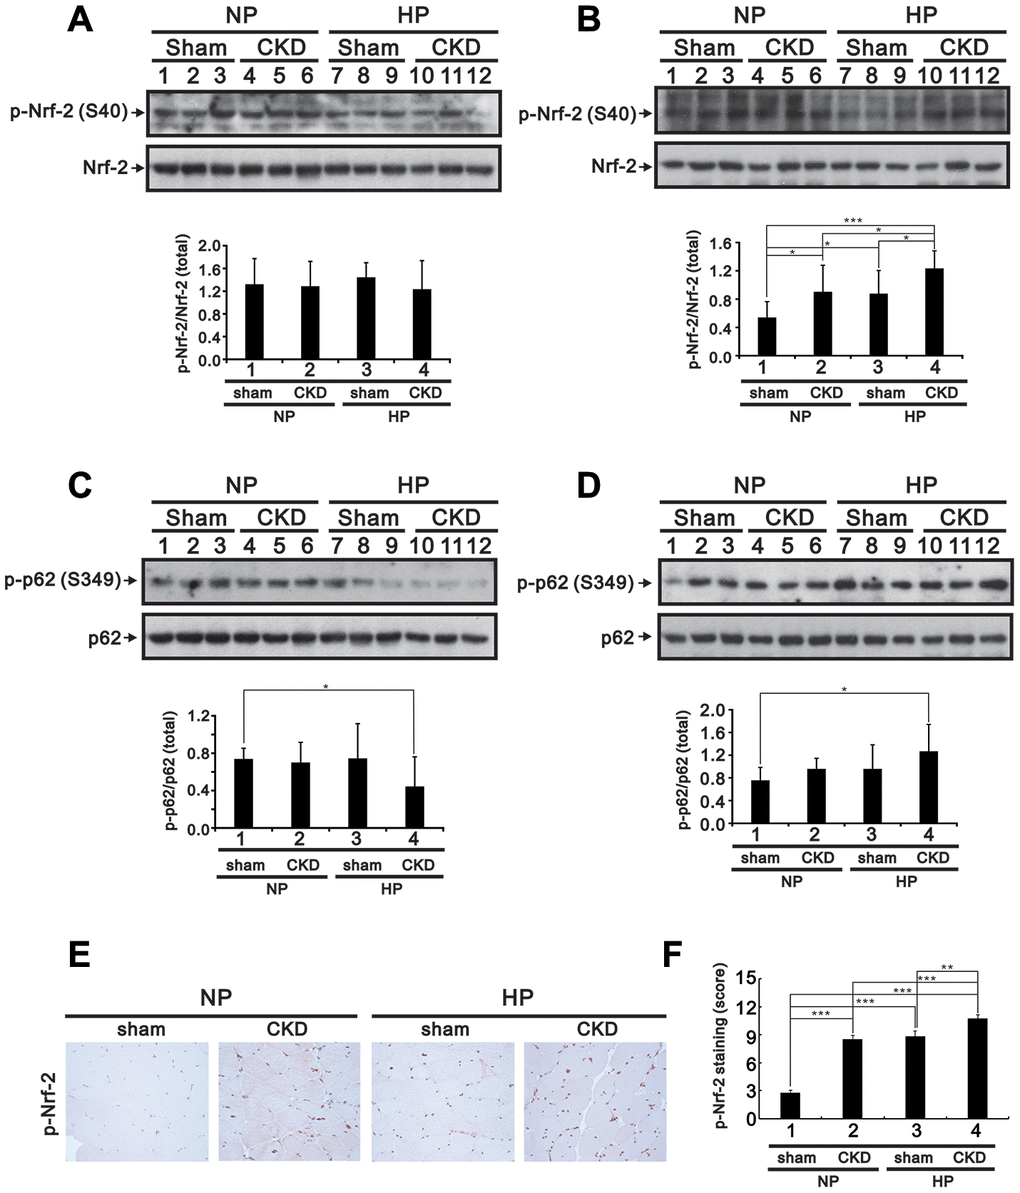 High-Pi diet alters Nrf2 and p62 expression in GA muscle from sham-operated and CKD mice. Eight-week-old mice underwent either a sham operation or 5/6 nephrectomy (CKD), after which they were fed a normal Pi (NP) or high-Pi (HP) diet for 20 weeks. Cytosolic (A and C) and nuclear (B and D) fractions were extracted from GA muscle samples and probed for Nrf2 and p-Nrf2 (A and B) and for p62 and p-p62 (C and D). Levels of these proteins were quantified by computer-assisted densitometric analysis. (E) Representative images of p-Nrf2 immunohistochemistry in GA muscle sections. (F) Semiquantitative IHC scoring from images like those shown in (E). Data are presented as means ± SEM. *P 